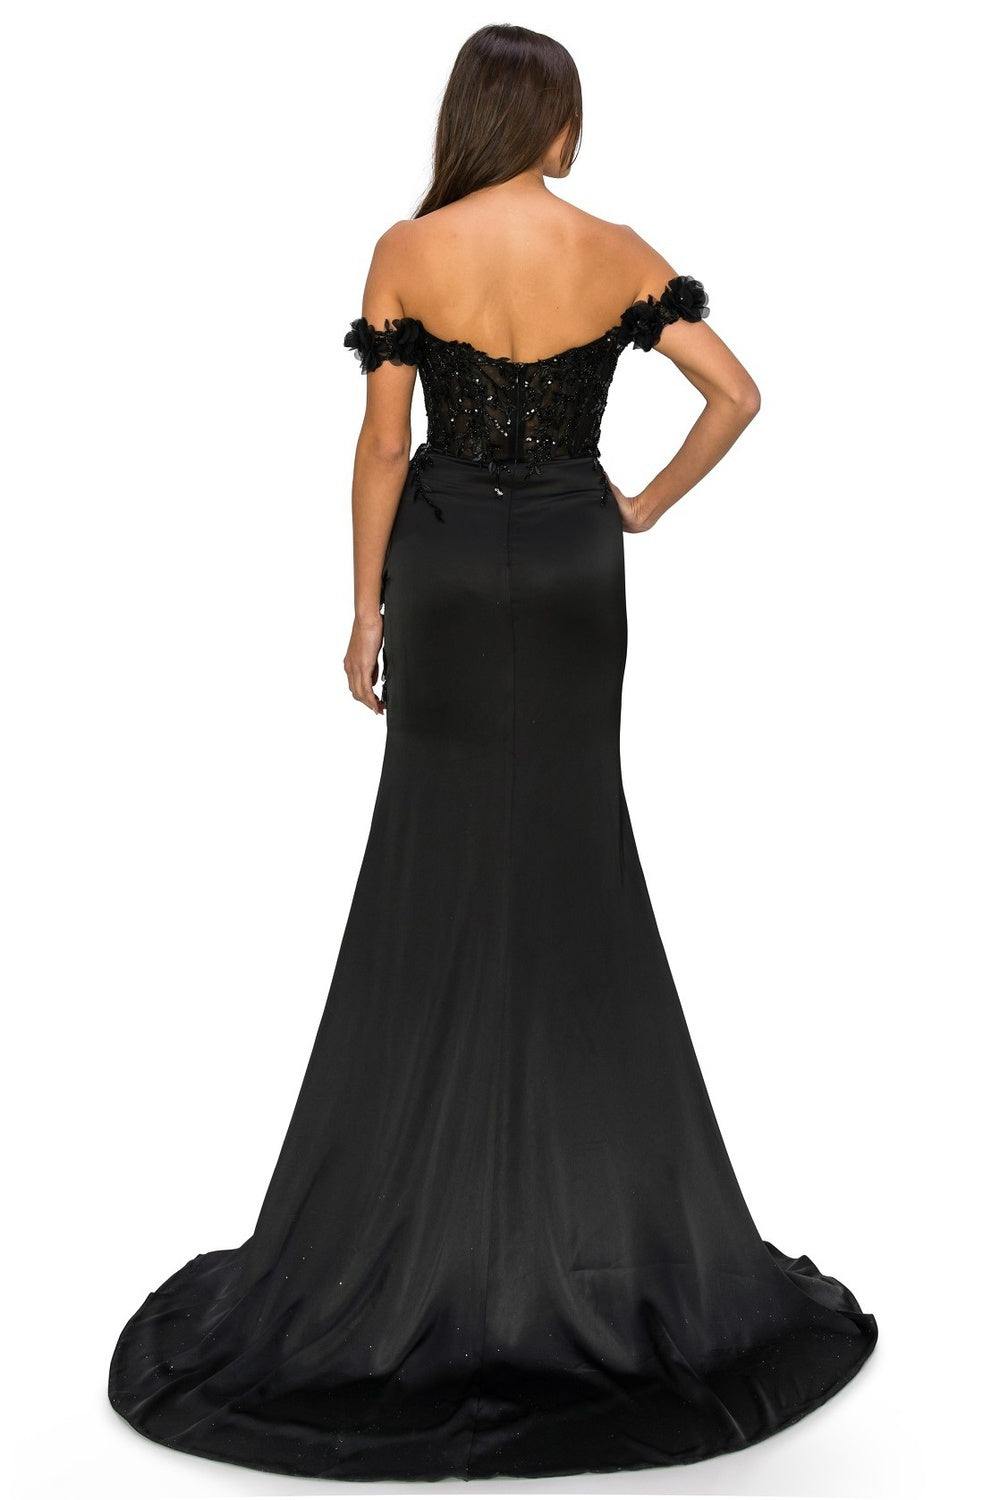 Black_1 Floral Off The Shoulder Gown AS8050J - Special Occasion-Curves